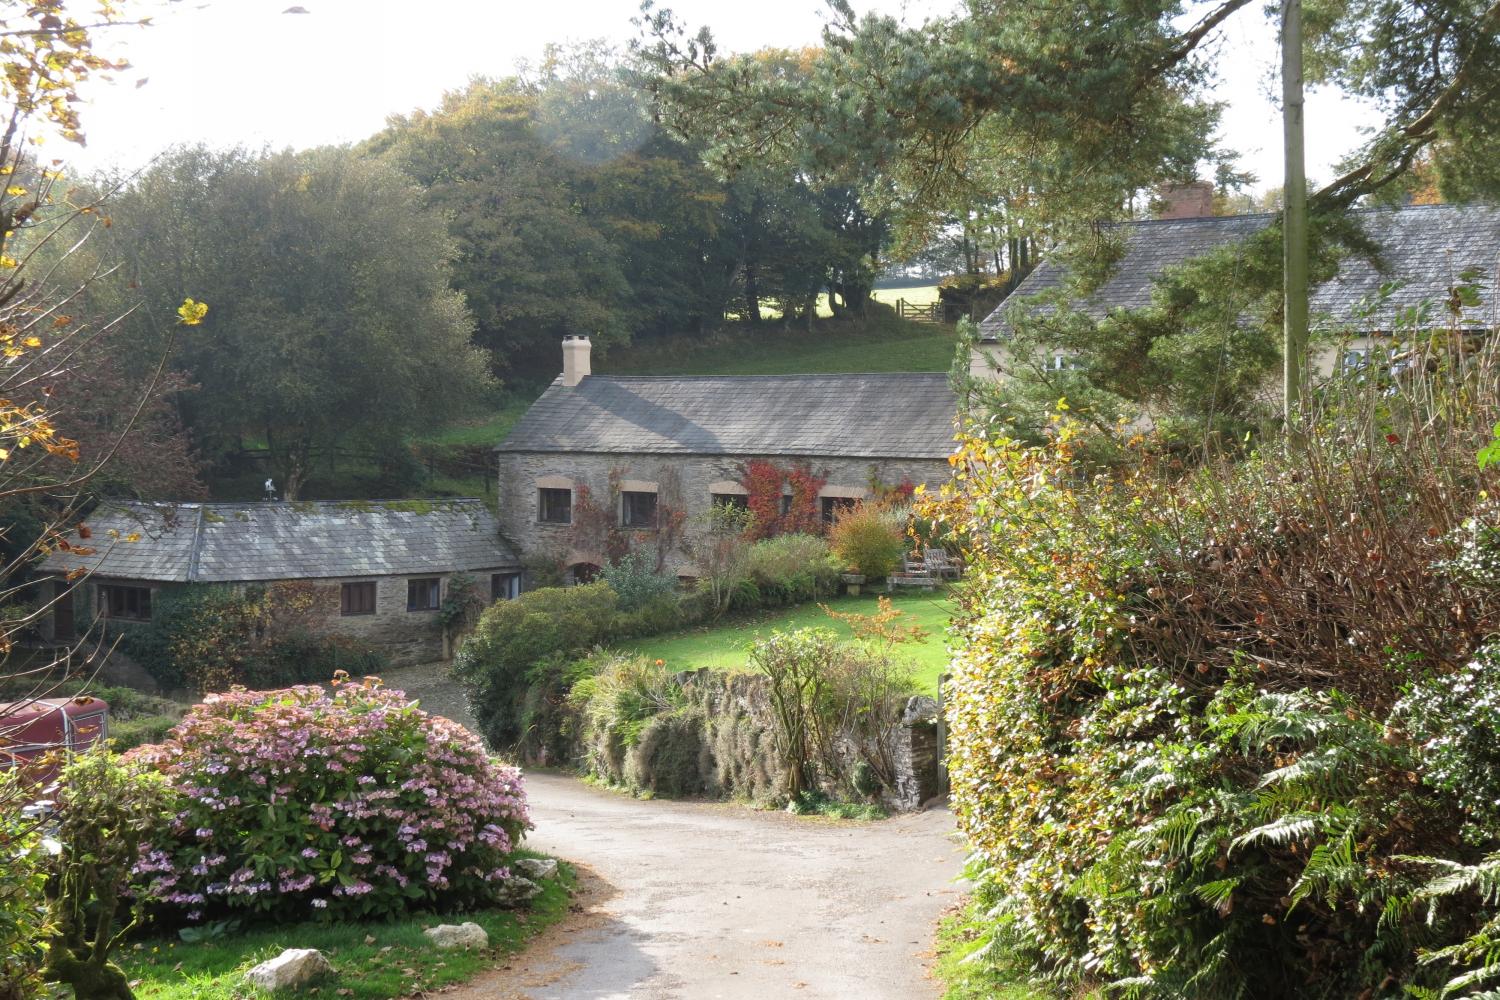 Looking towards the cottages from drive